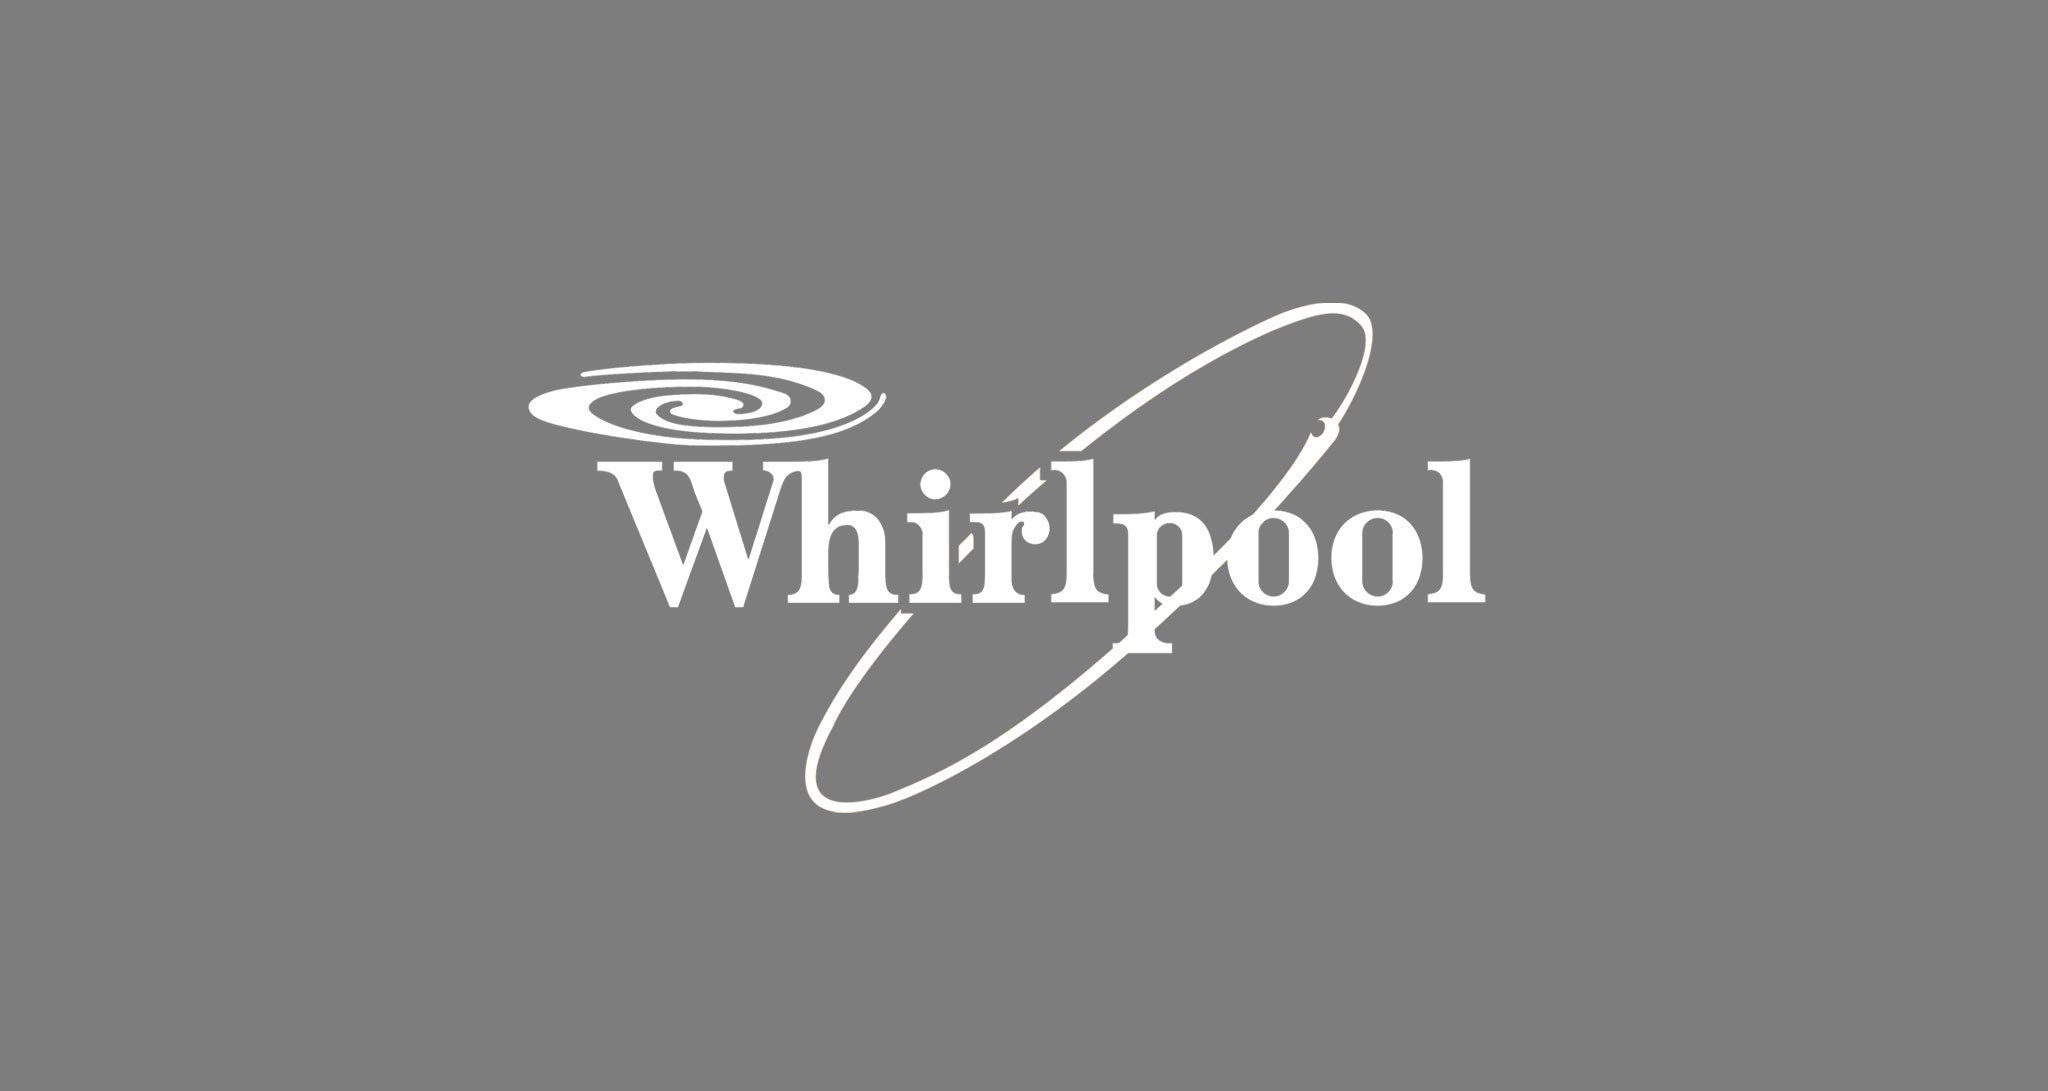 Whirlpool Selects ClearCenter for Custom Email Solution